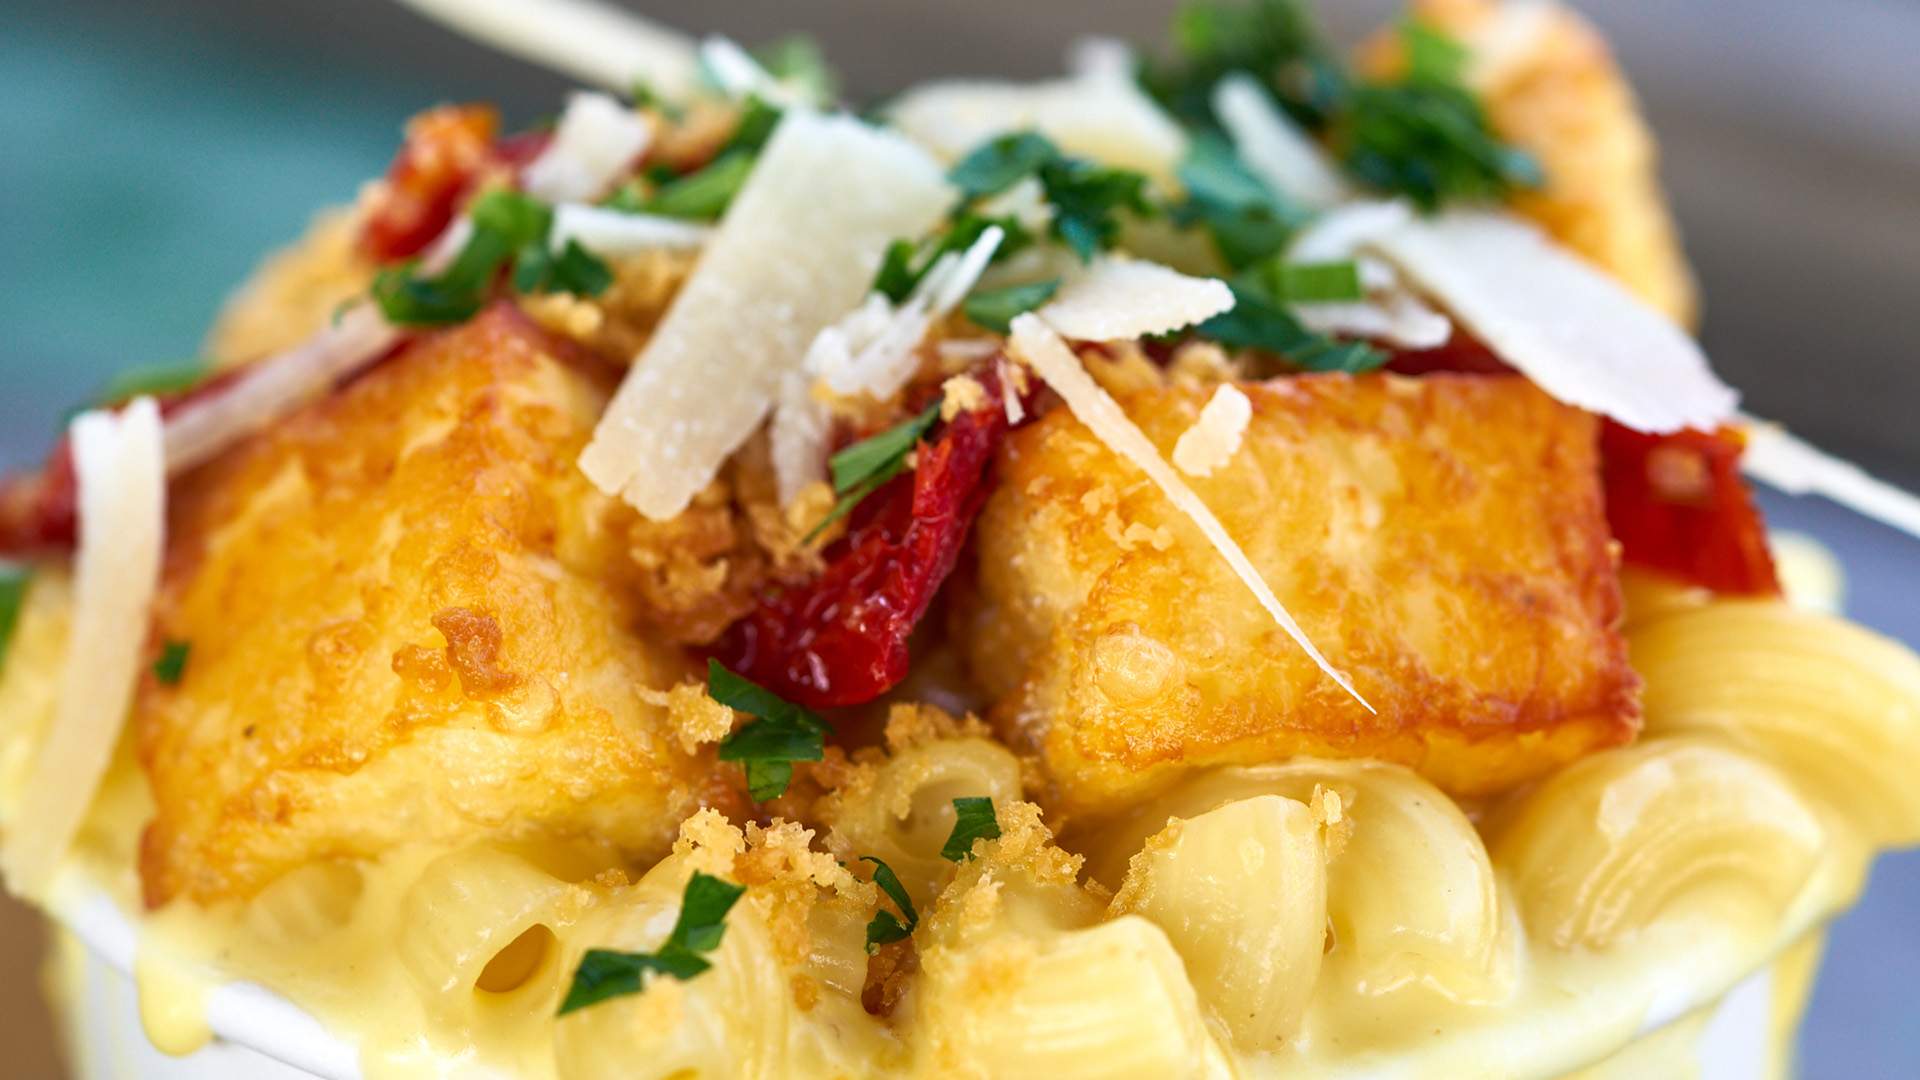 Mac From Way Back Is Brisbane's First Eatery Dedicated to Mac 'n' Cheese